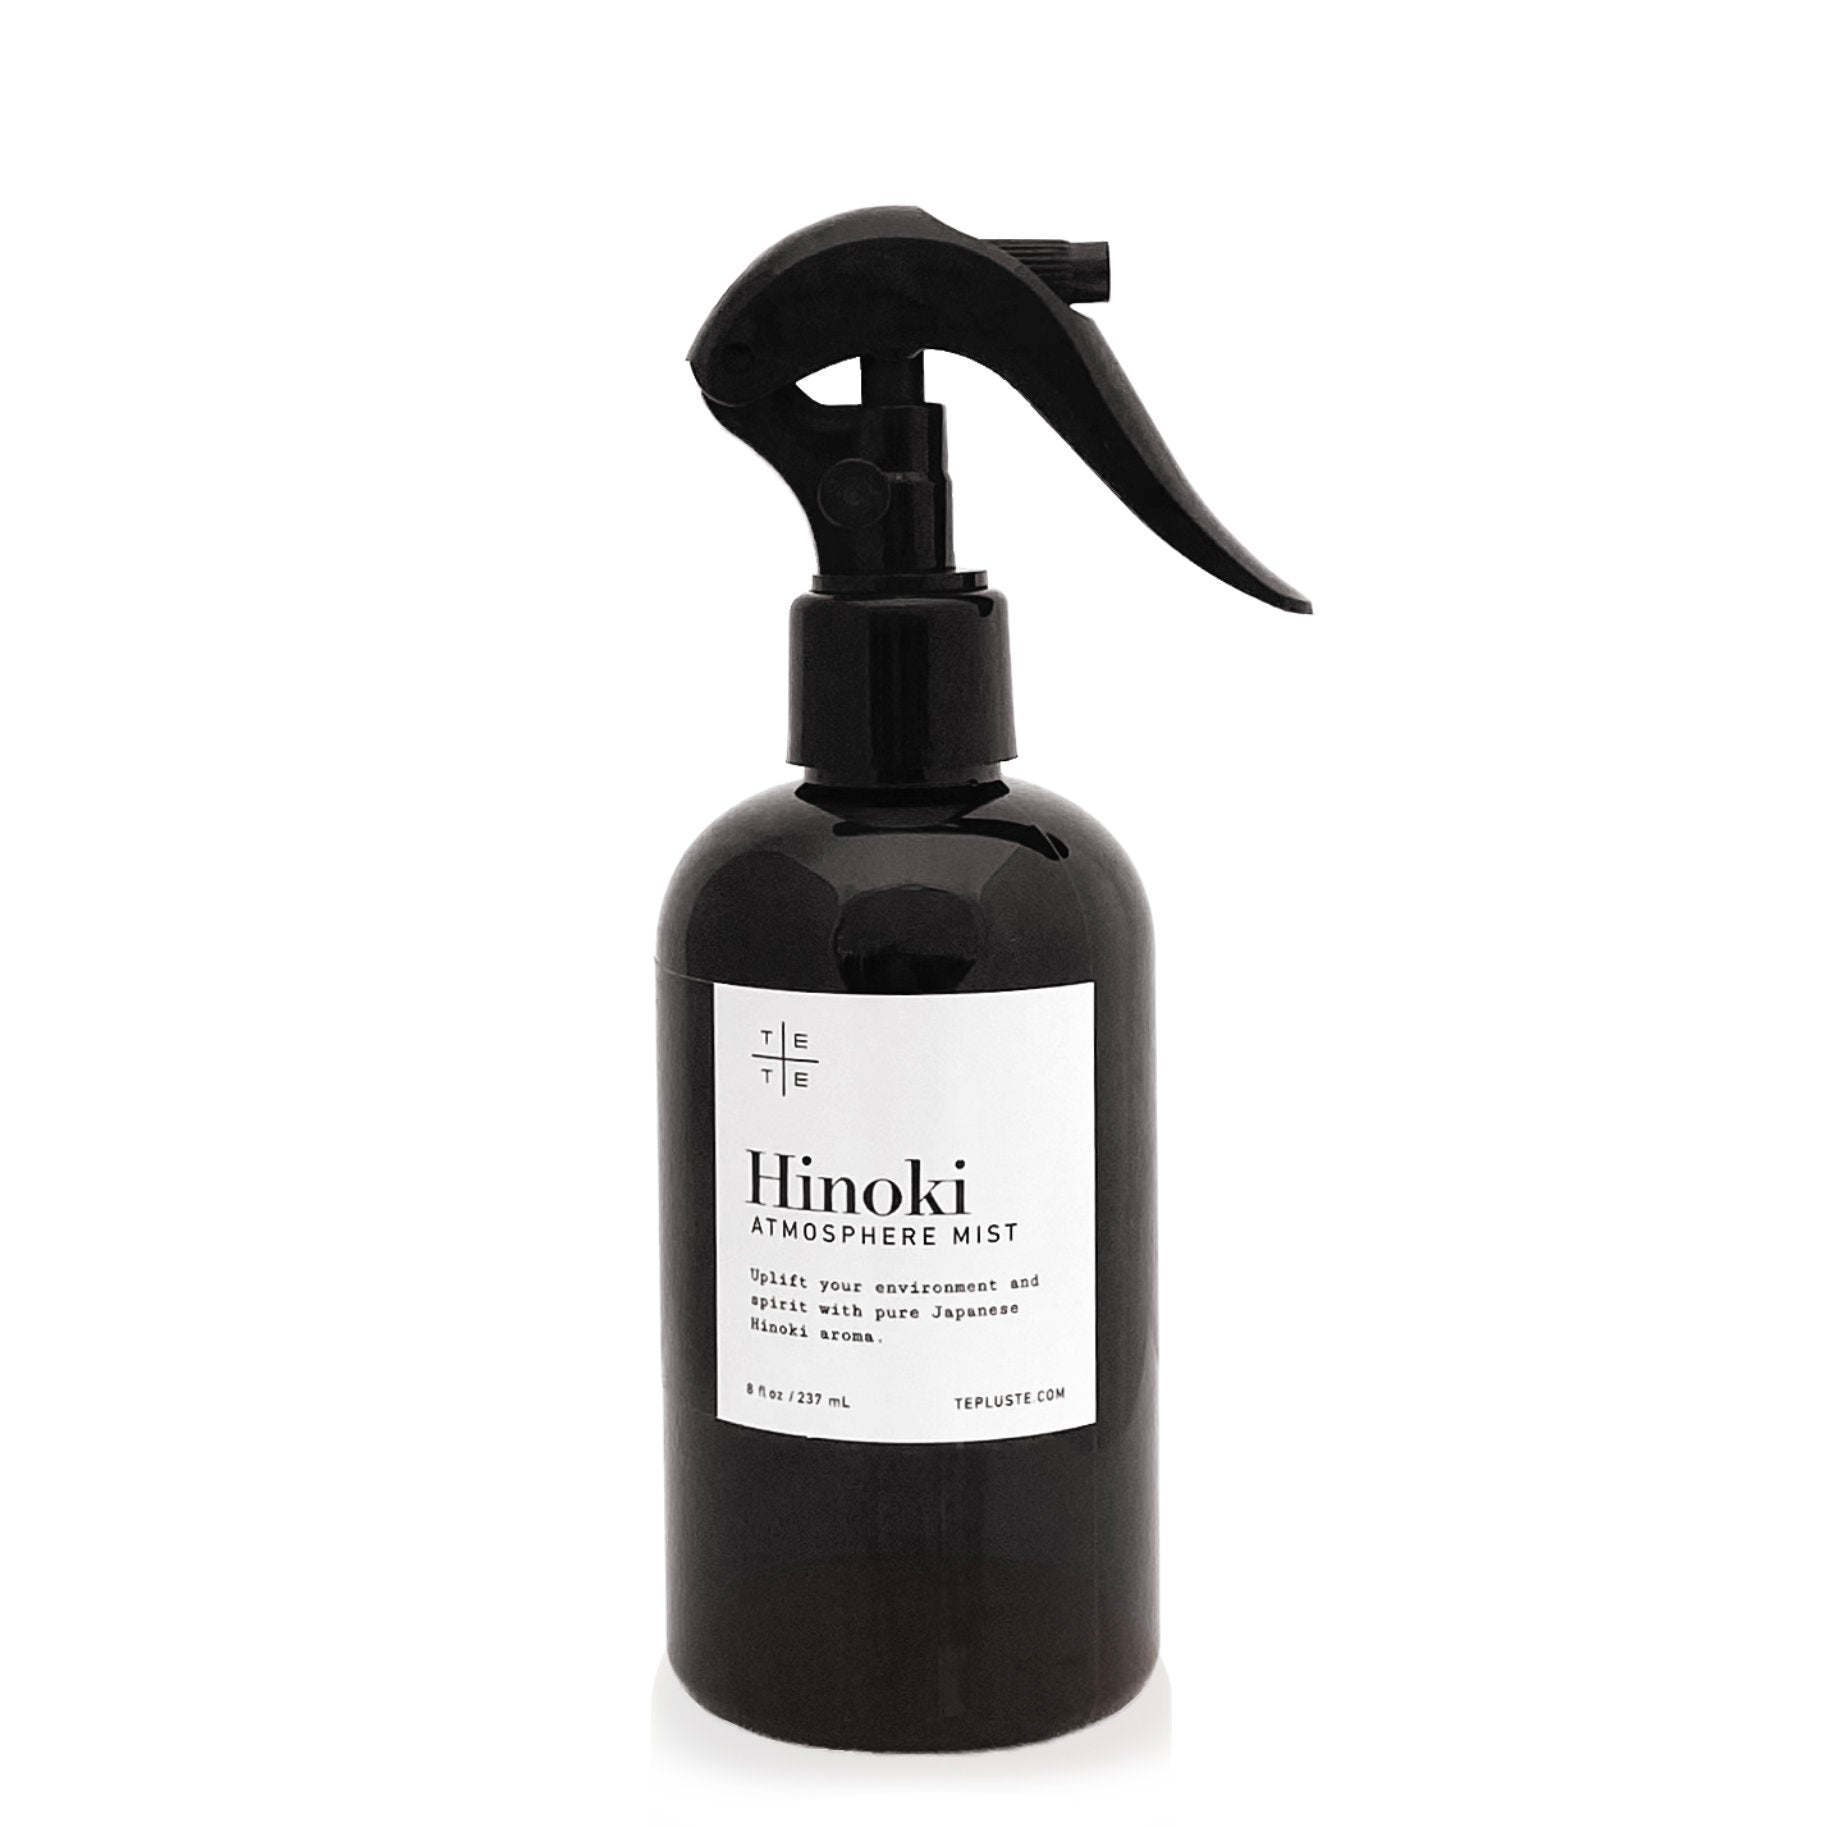 Te Plus Te Hinoki Atmosphere mist. Uplift your environment and spirit with pure Hinoki aroma. Spray Hinoki Atmosphere Mist as needed throughout the home and office or on intimate items such as pillows, towels and clothes. 